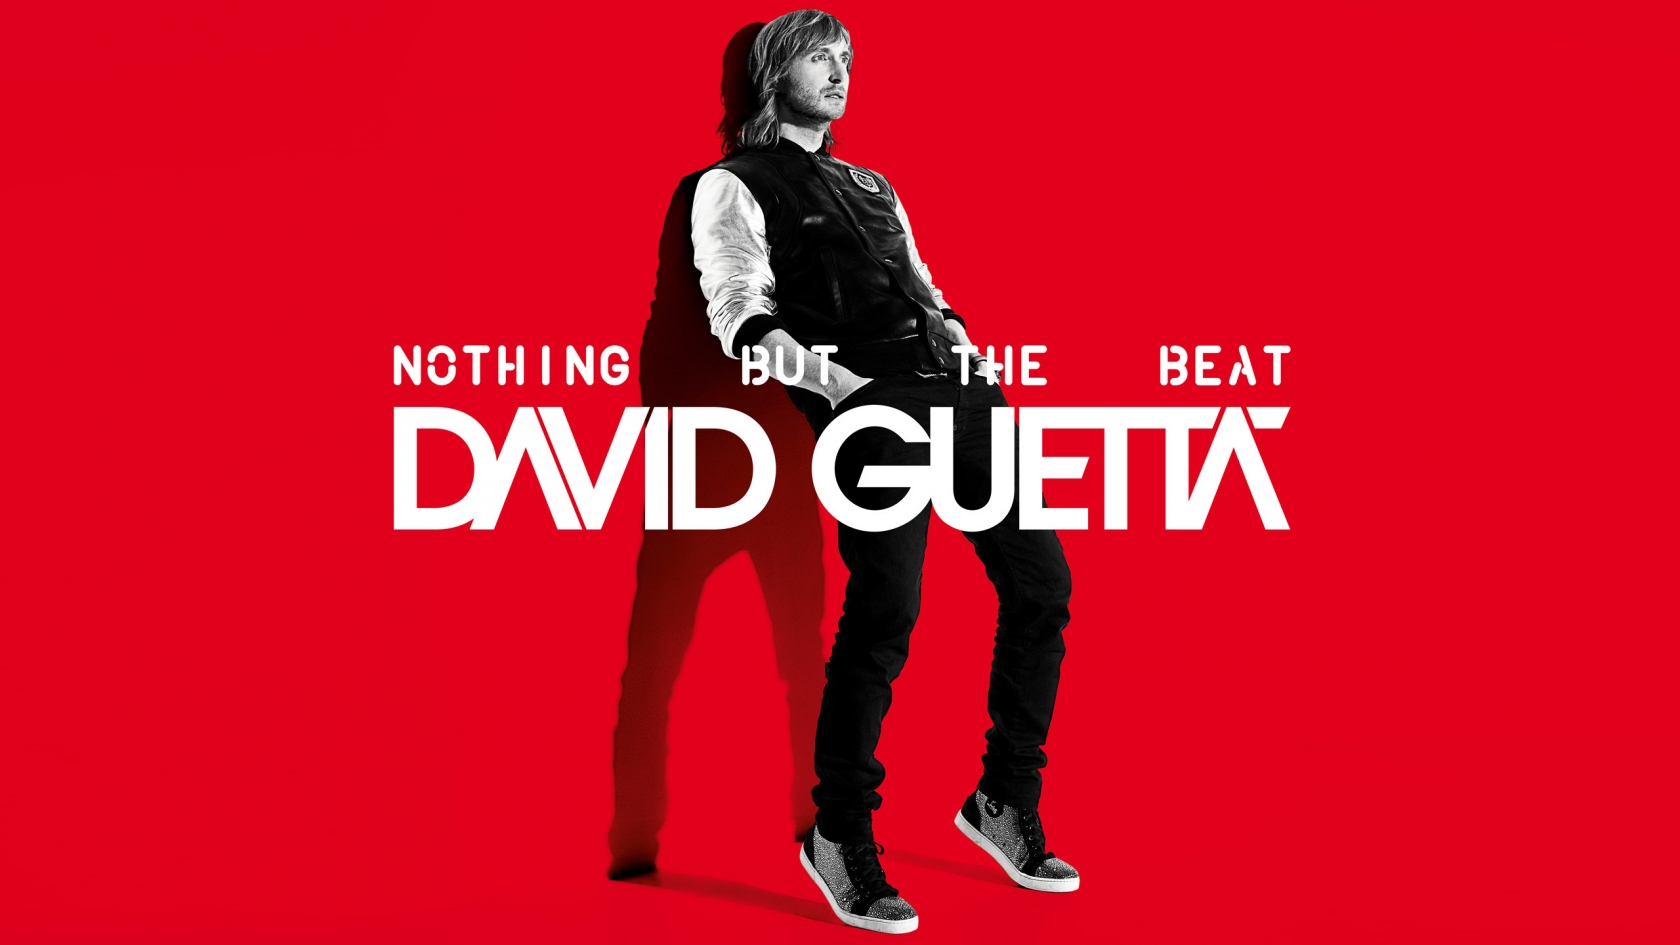 David Guetta Nothing But the Beat for 1680 x 945 HDTV resolution